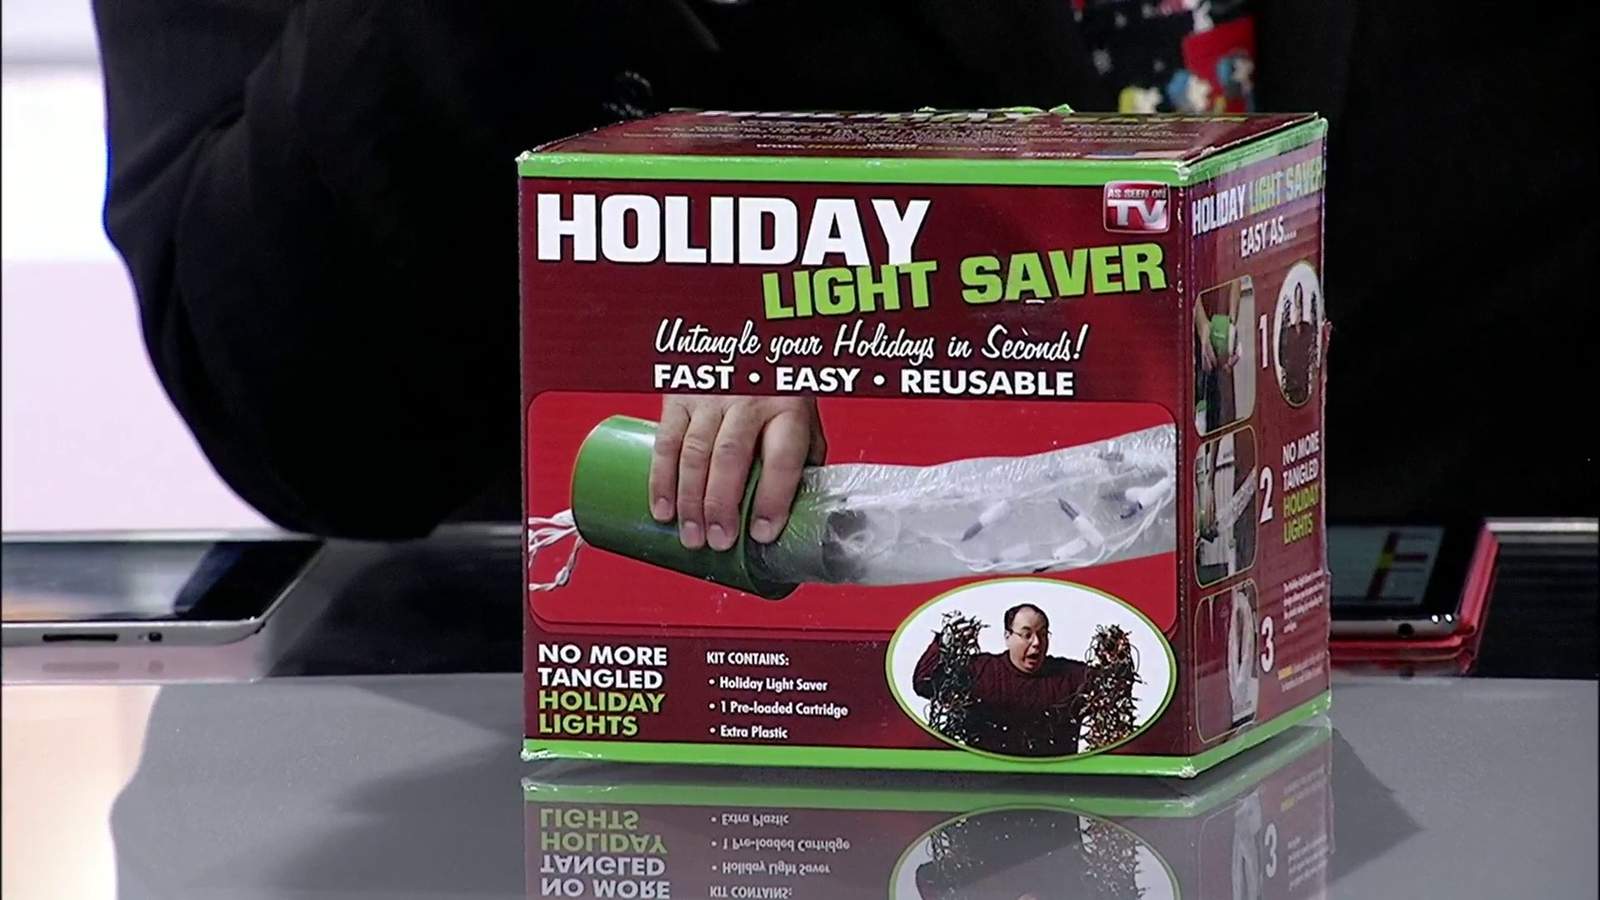 Deal or Dud: Holiday Light Saver